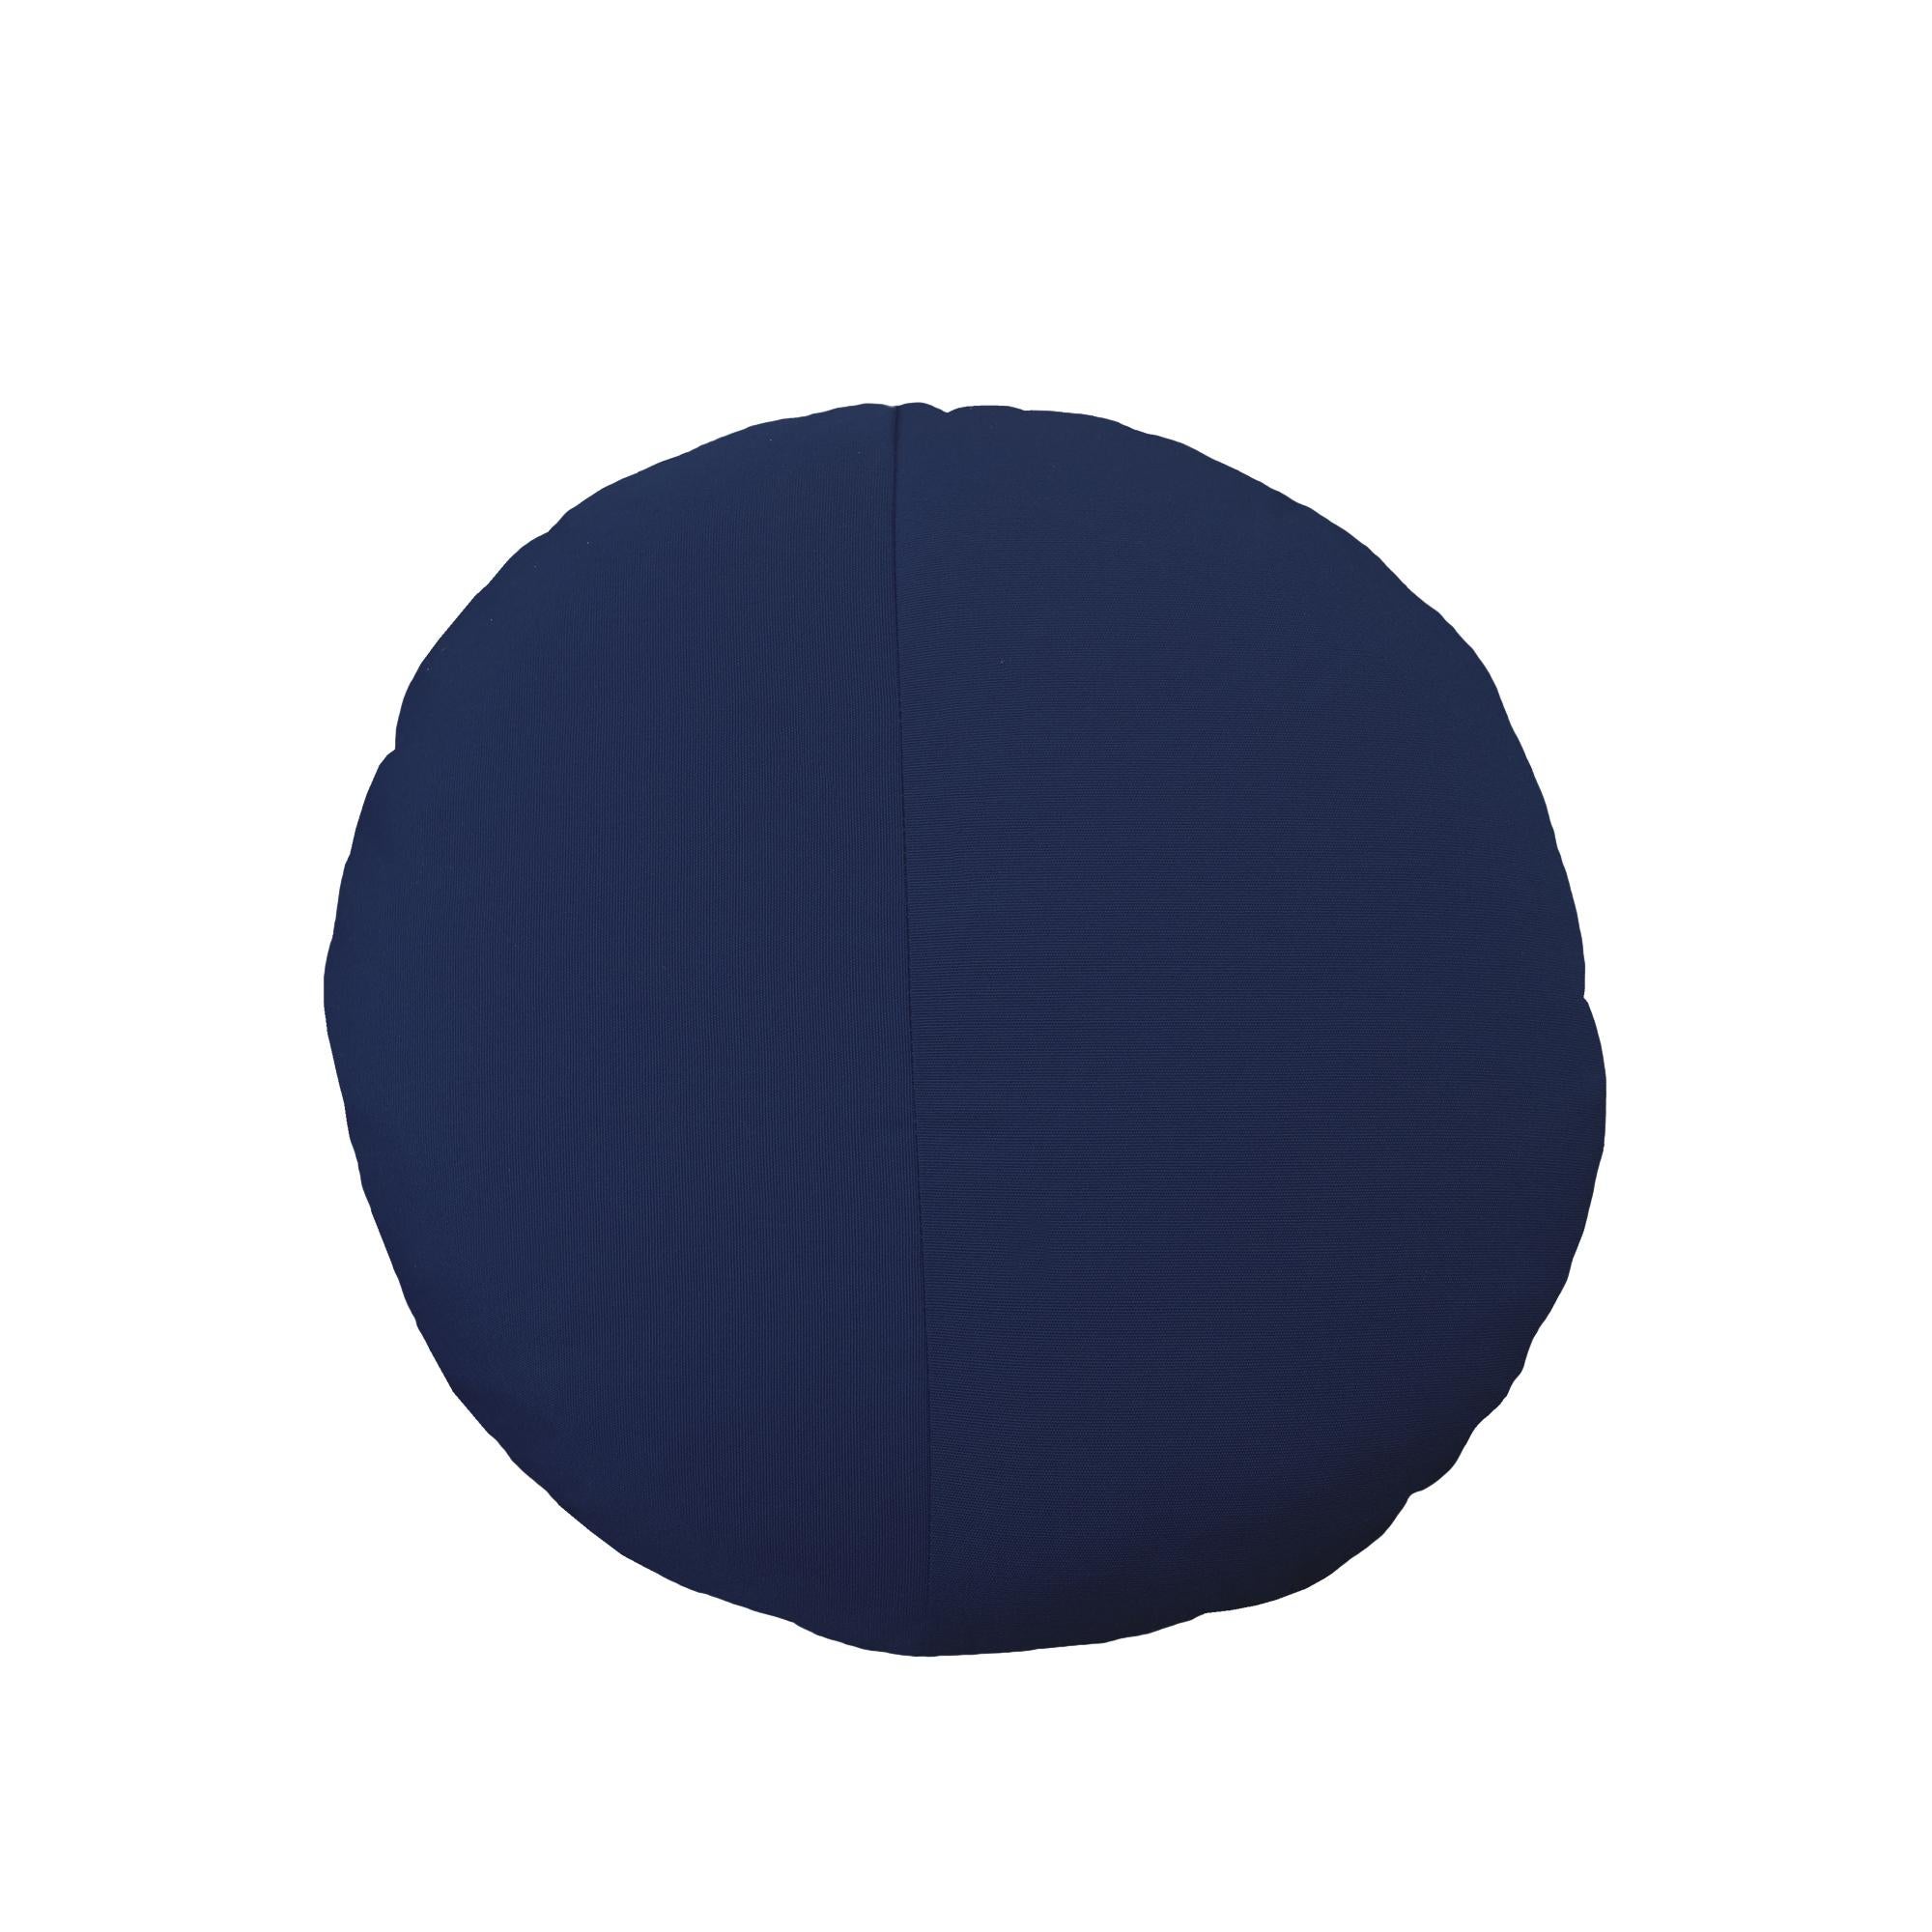 Other Bend Goods - Round Throw Pillow in Black Sunbrella For Sale